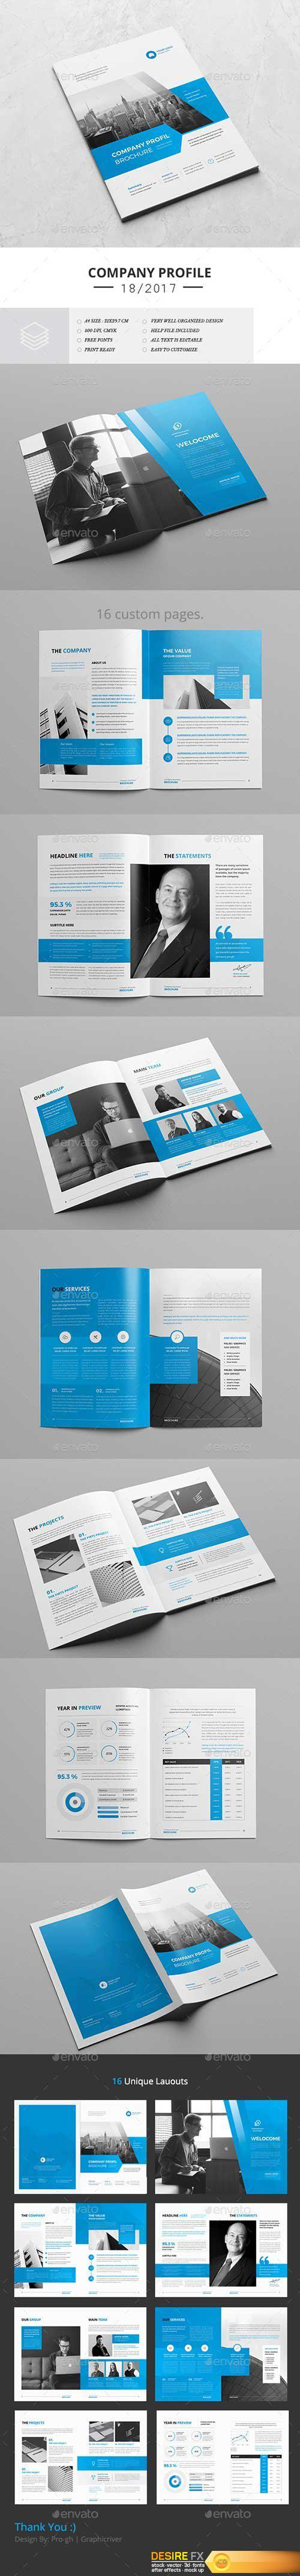 Graphicriver - Corporate Brochure 16 Pages 20655591